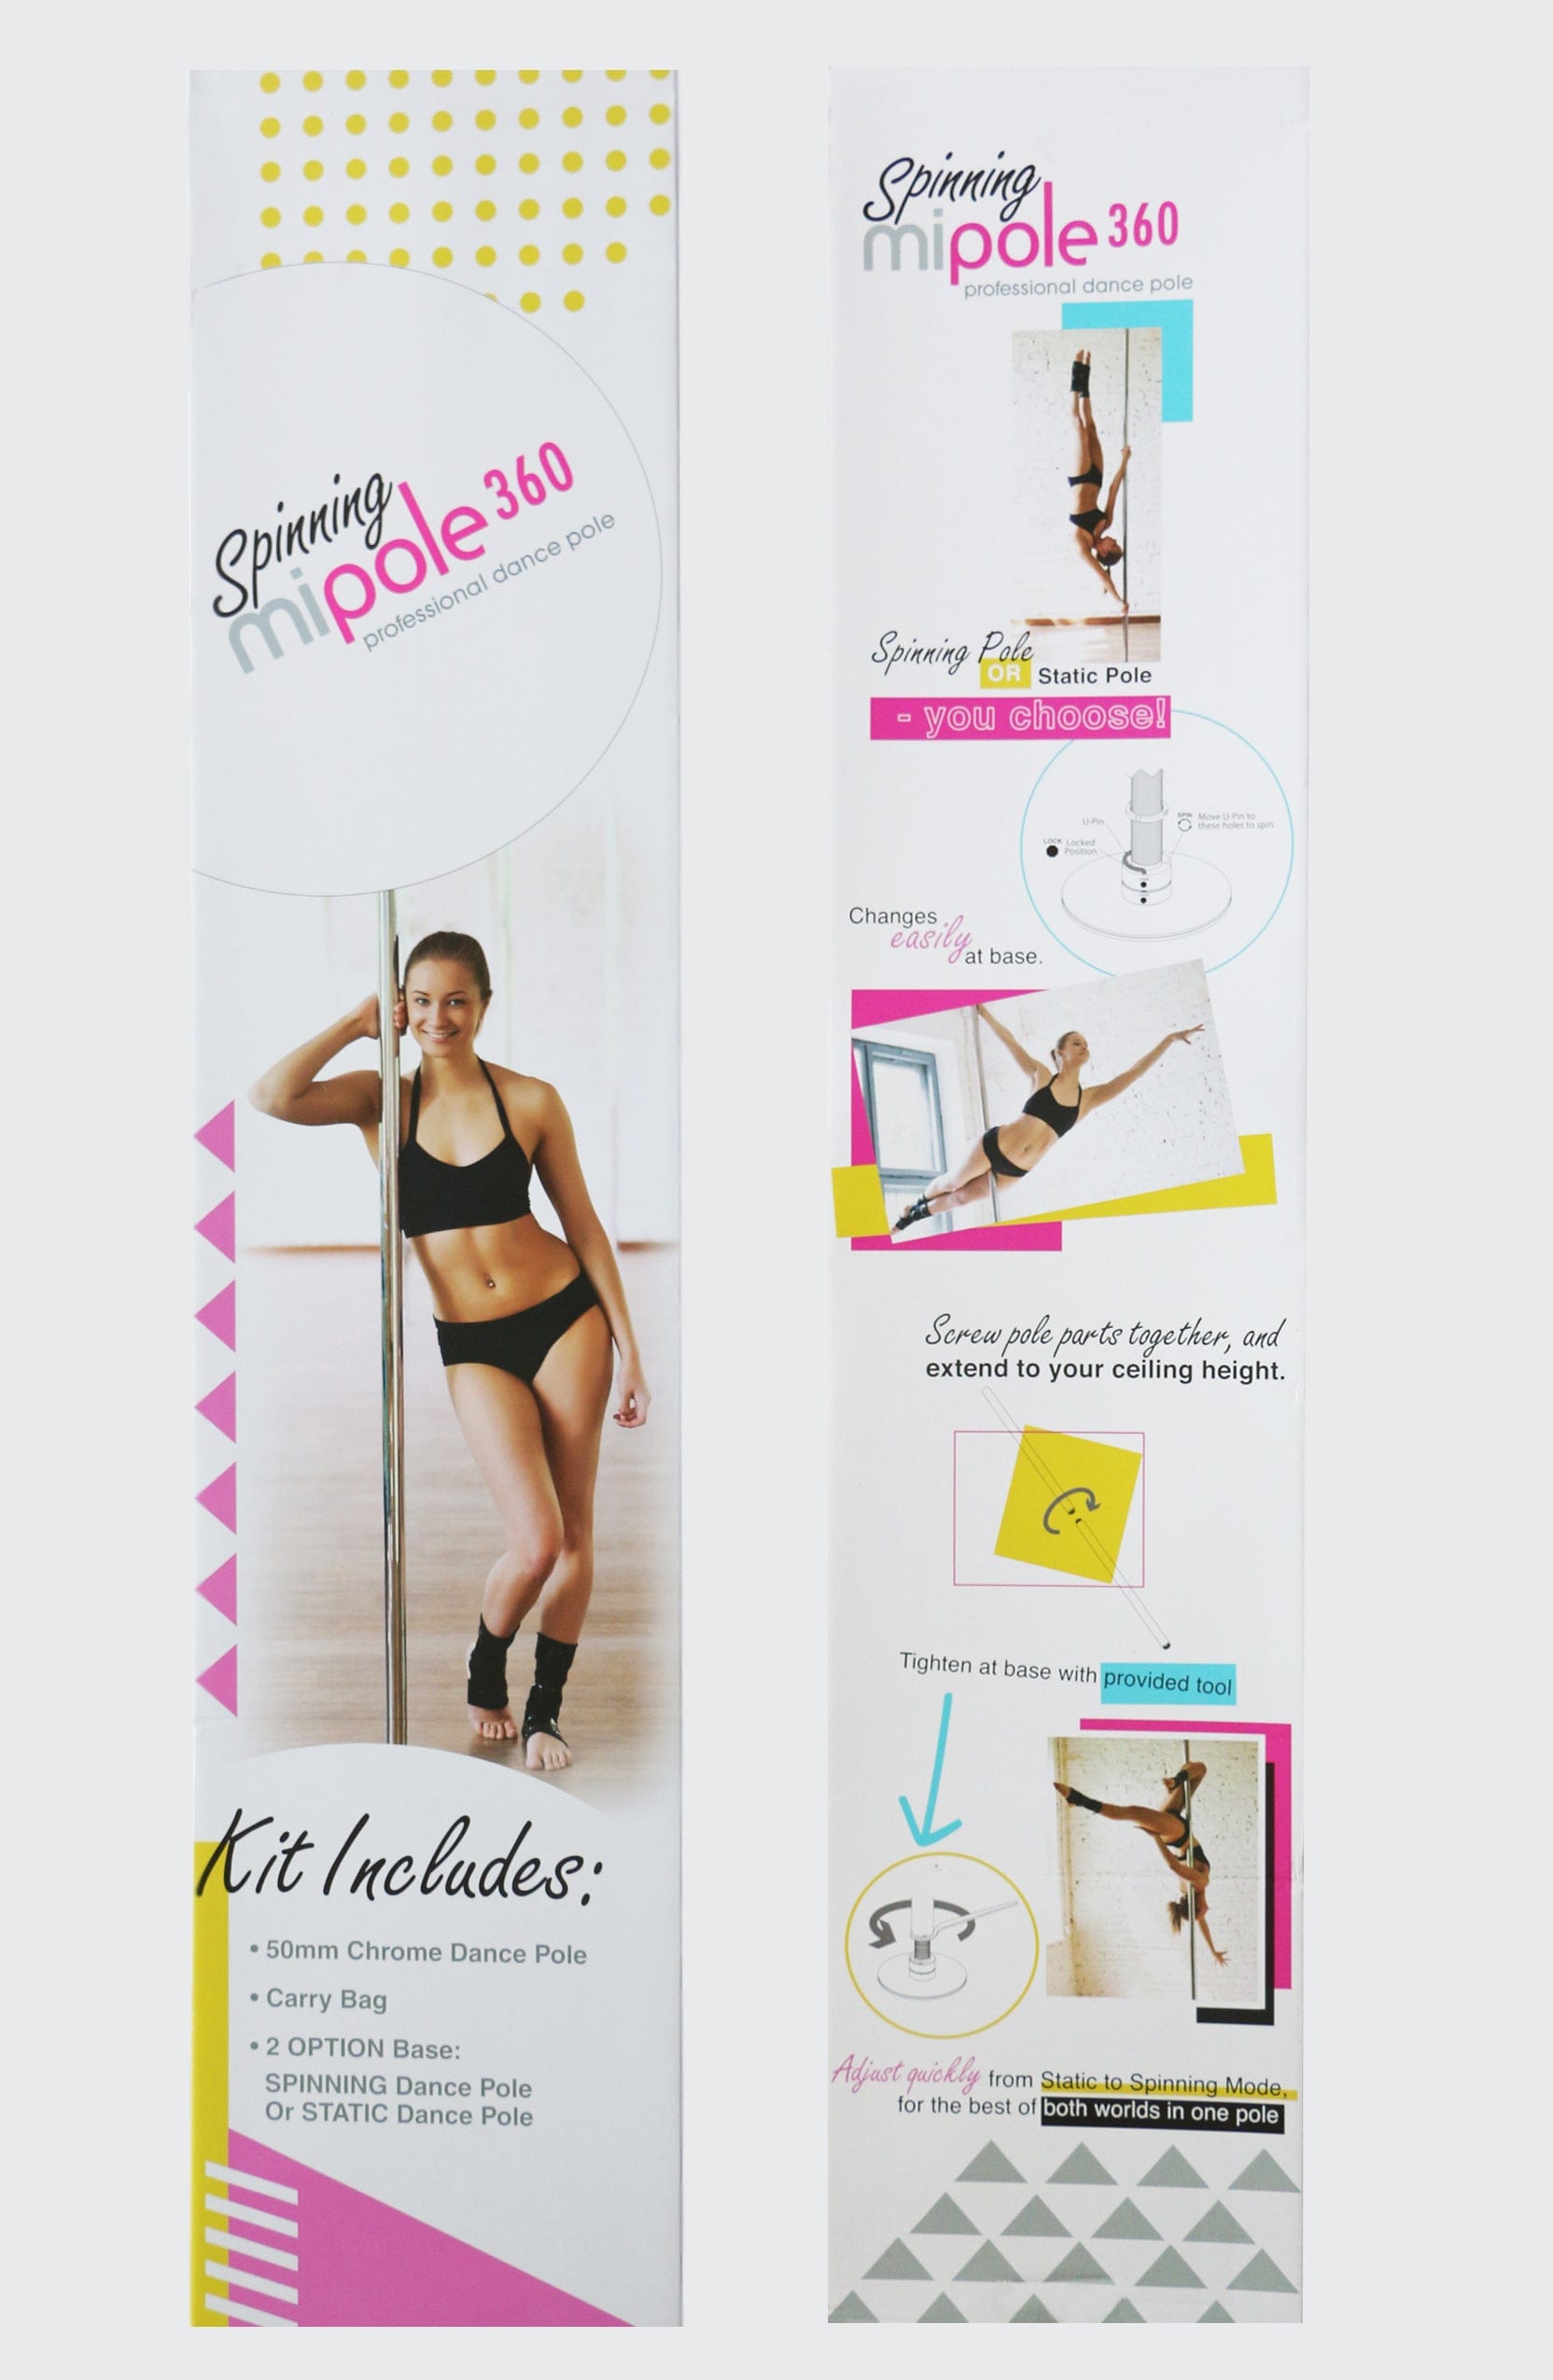 SPINNING PROFESSIONAL DANCE POLE